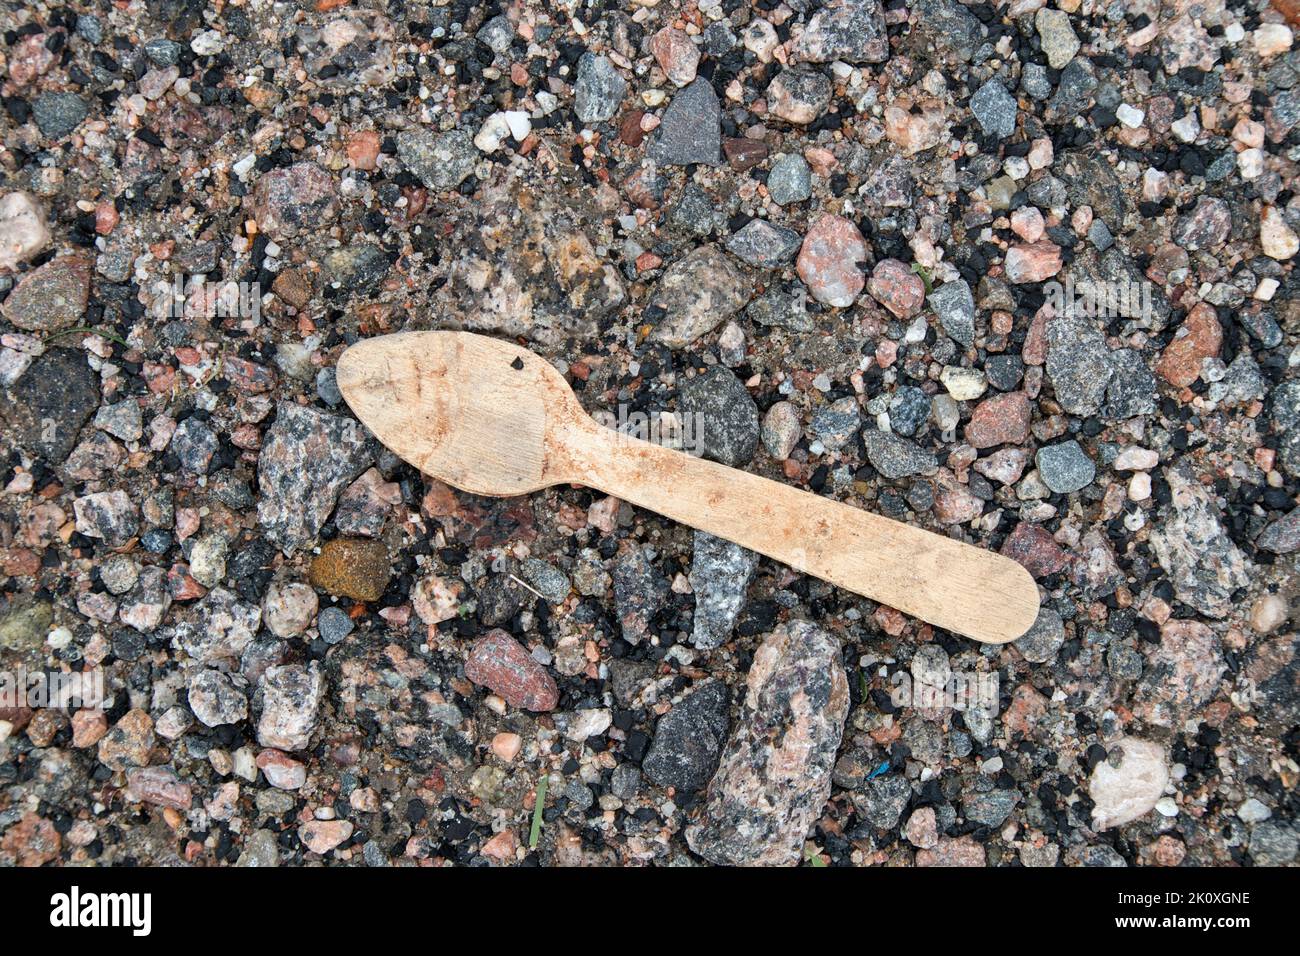 Biodegradable wooden spoon on the ground outdoors Stock Photo